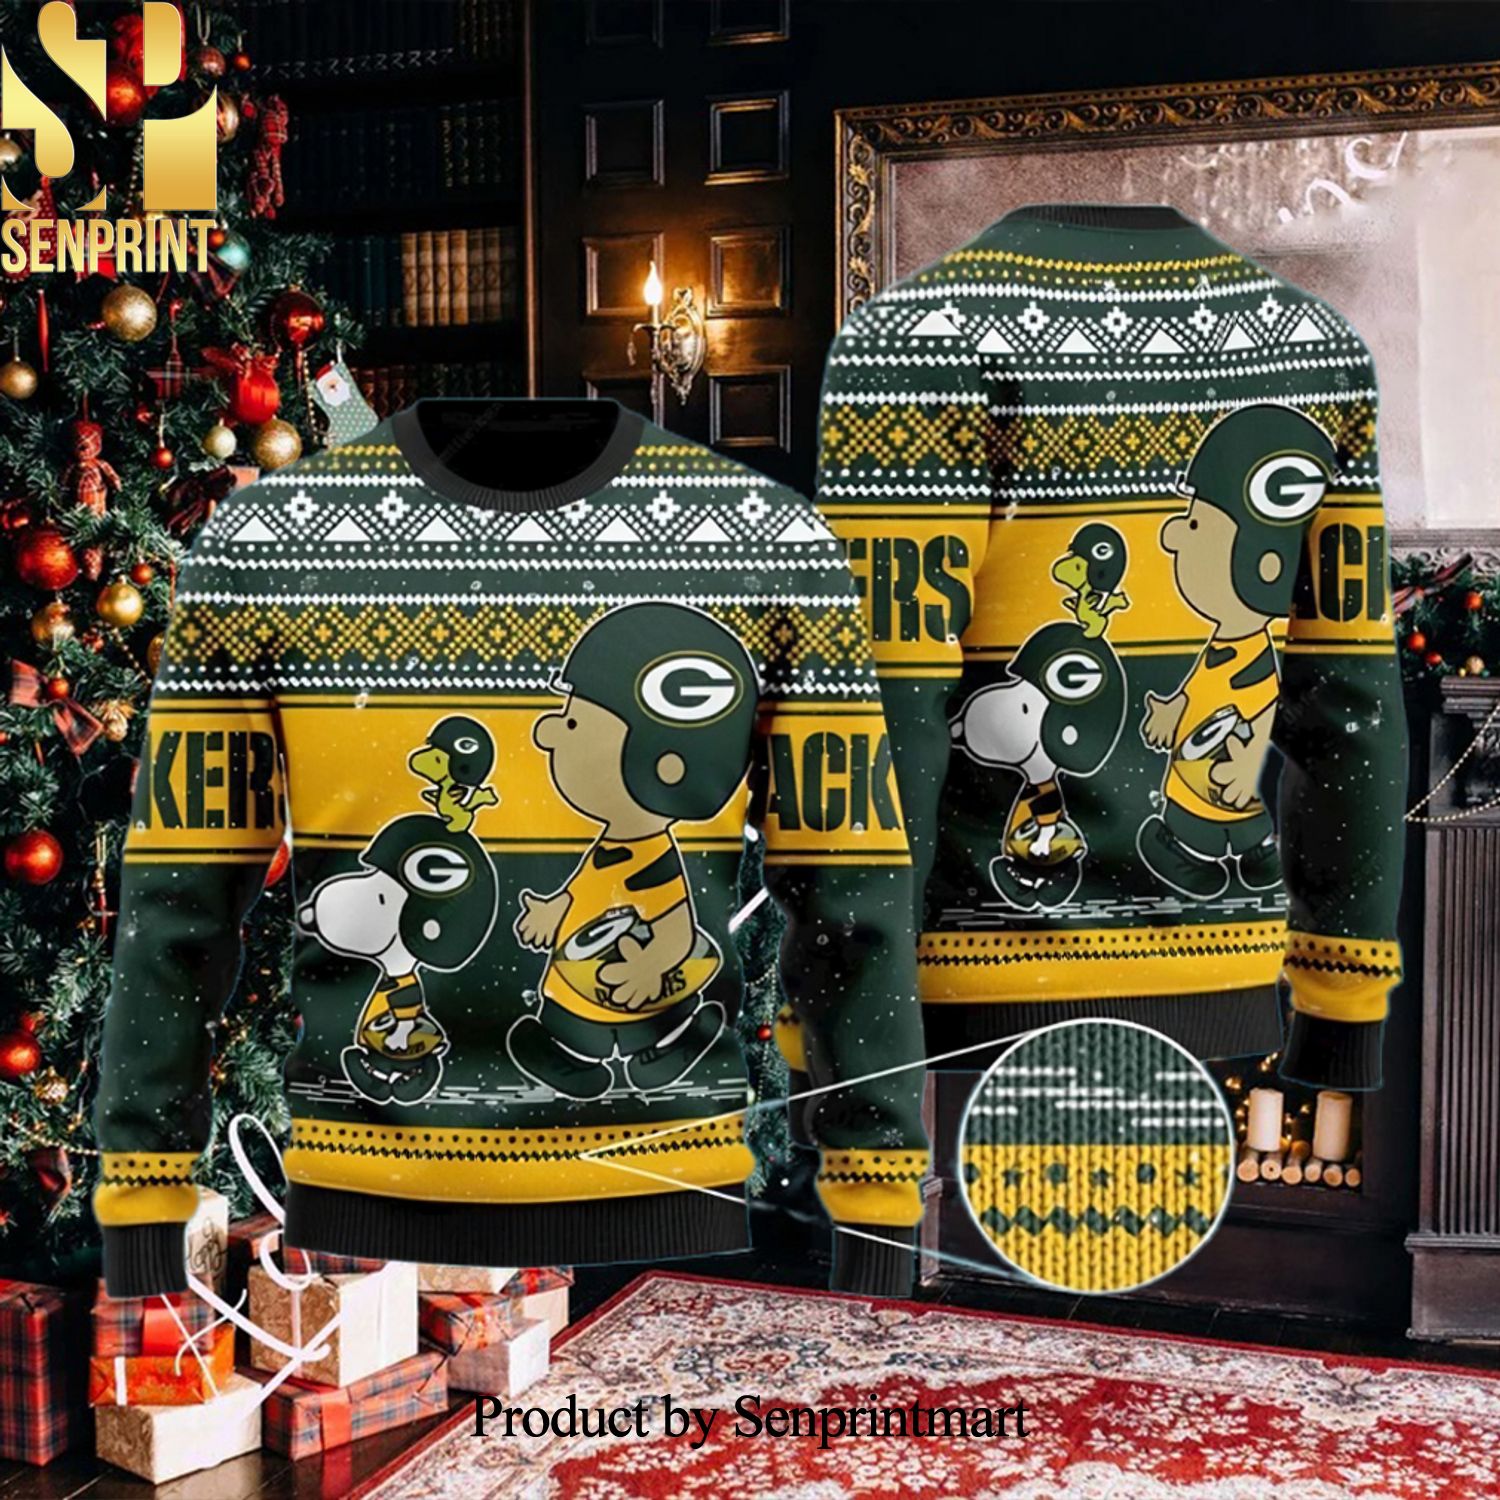 packers light up sweater